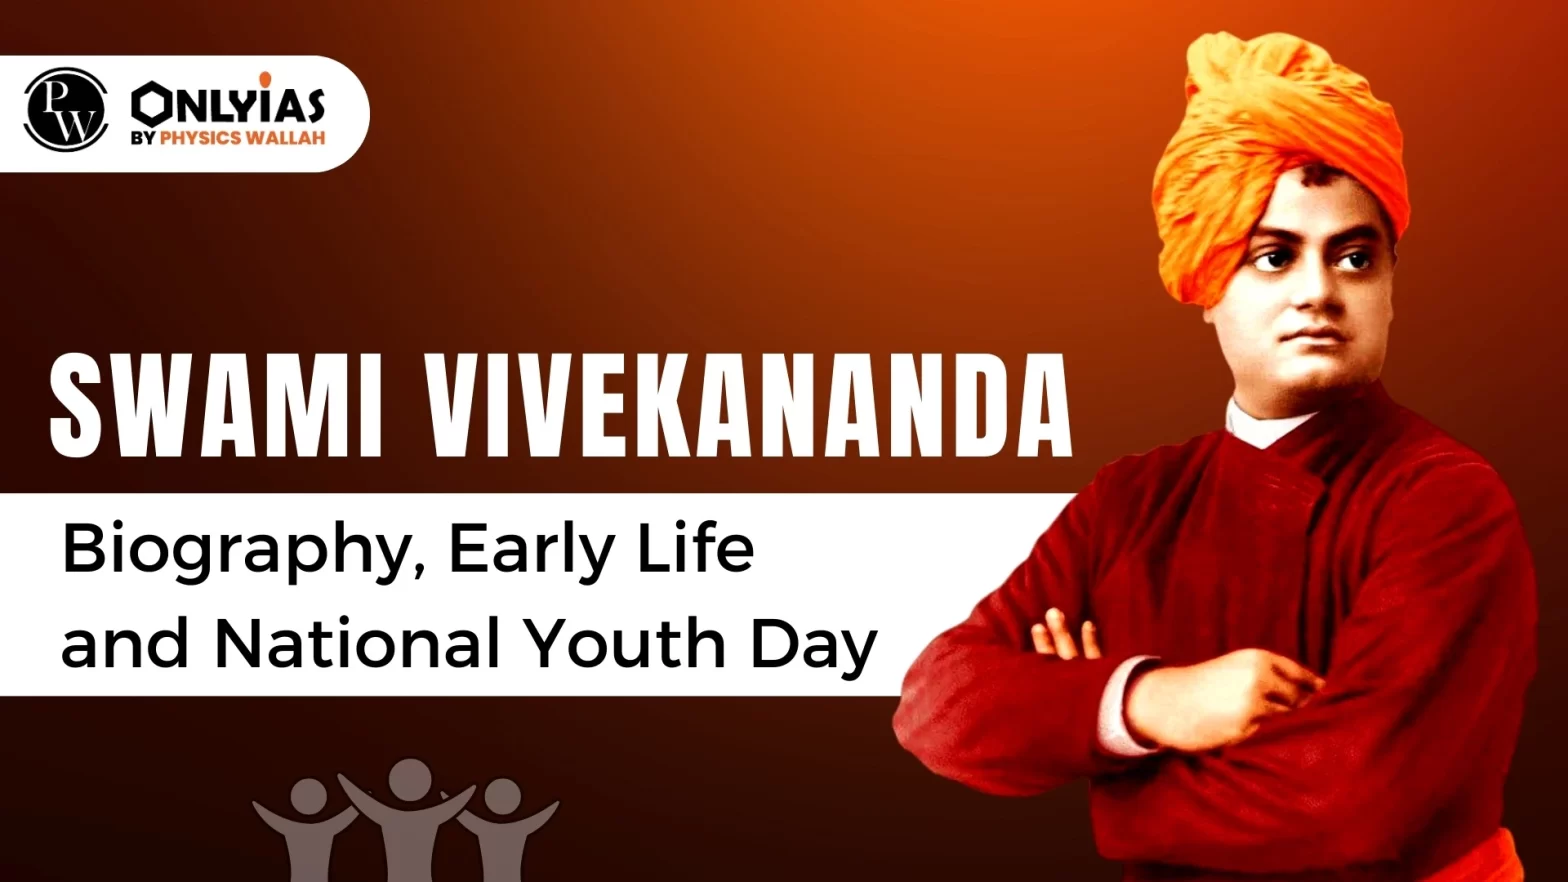 Swami Vivekananda: Biography, Early Life And National Youth Day - PWOnlyIAS